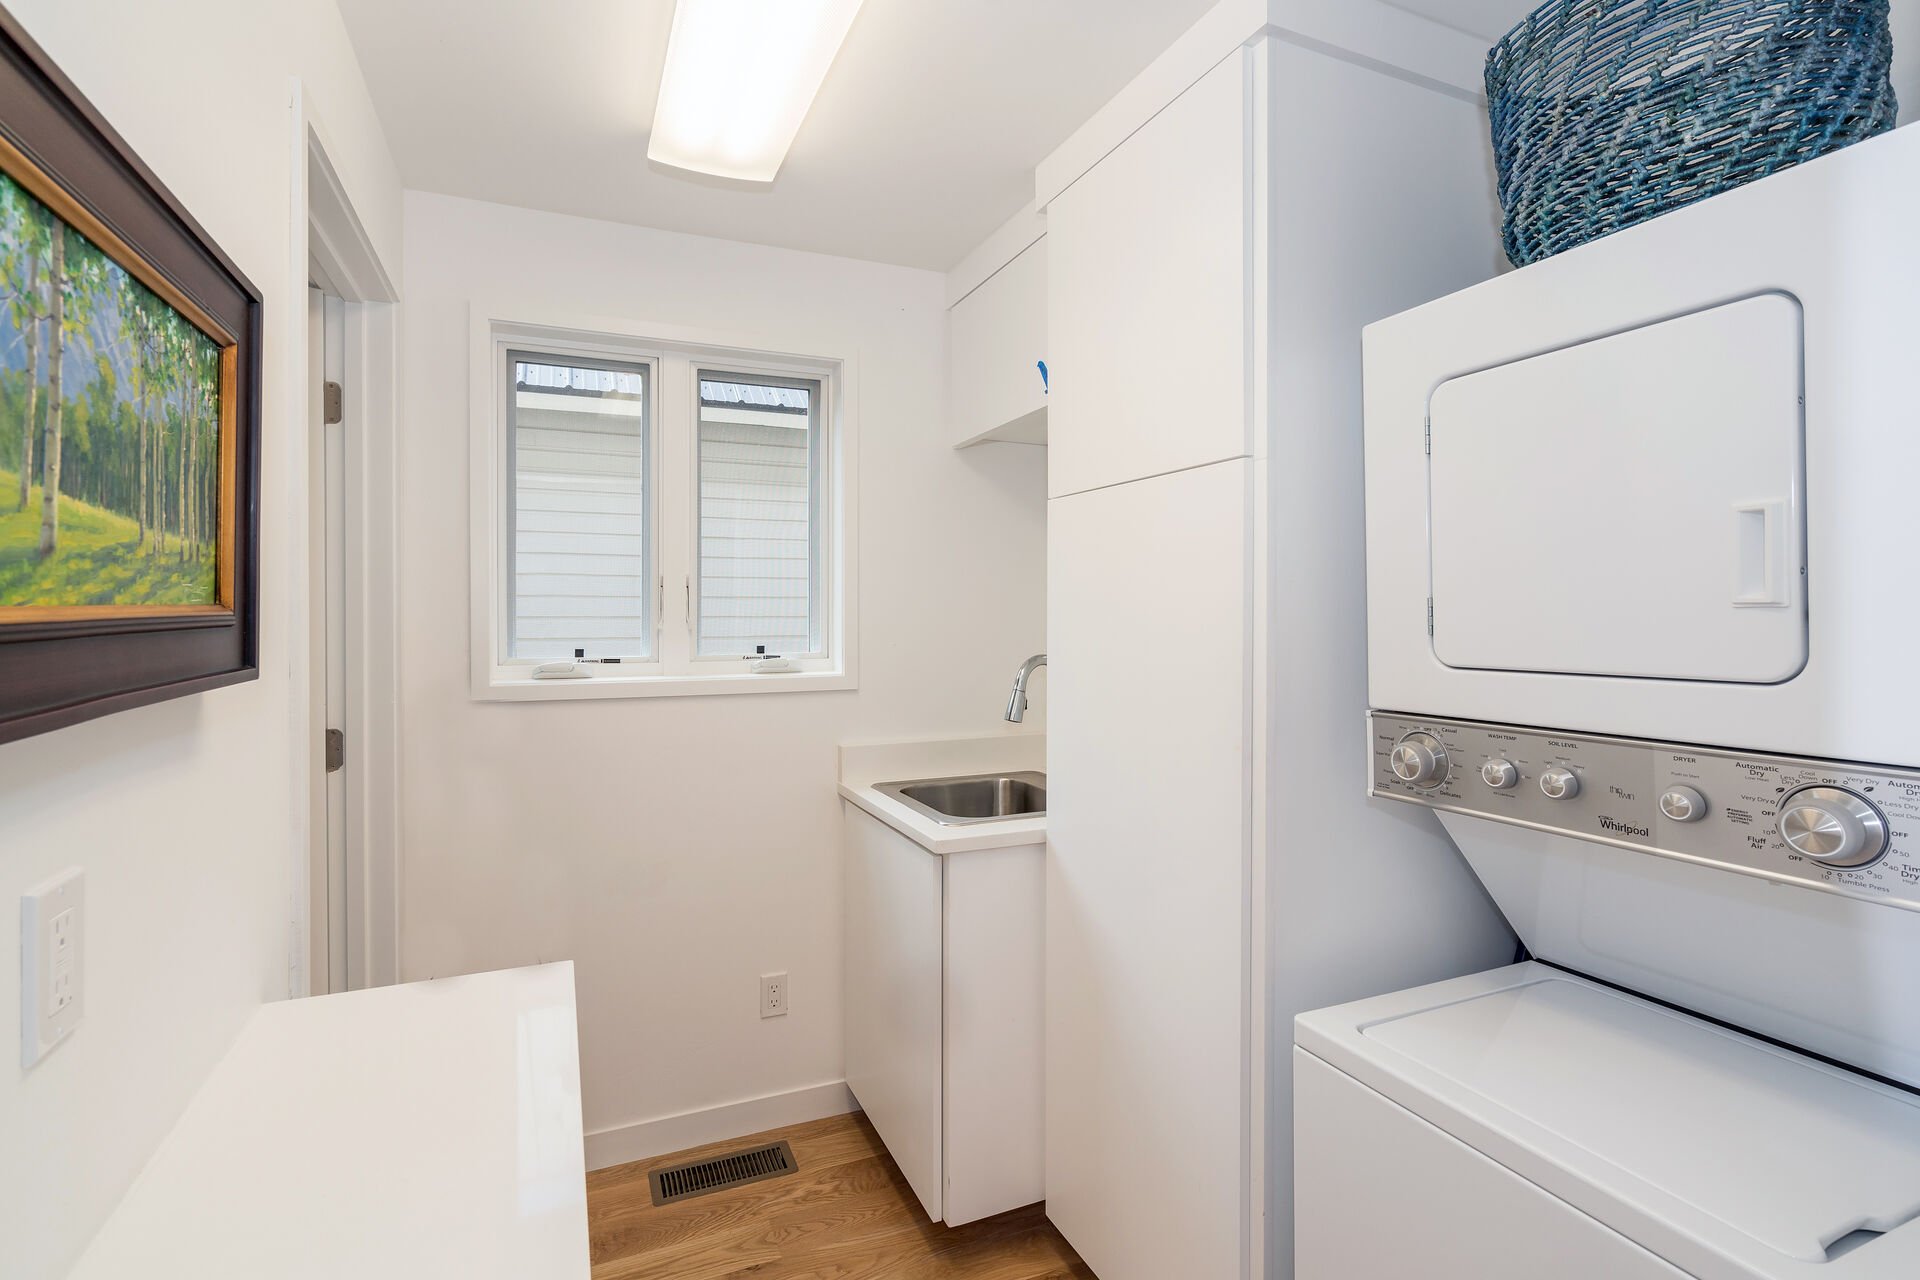 Laundry Room with Stacked Washer and Dryer